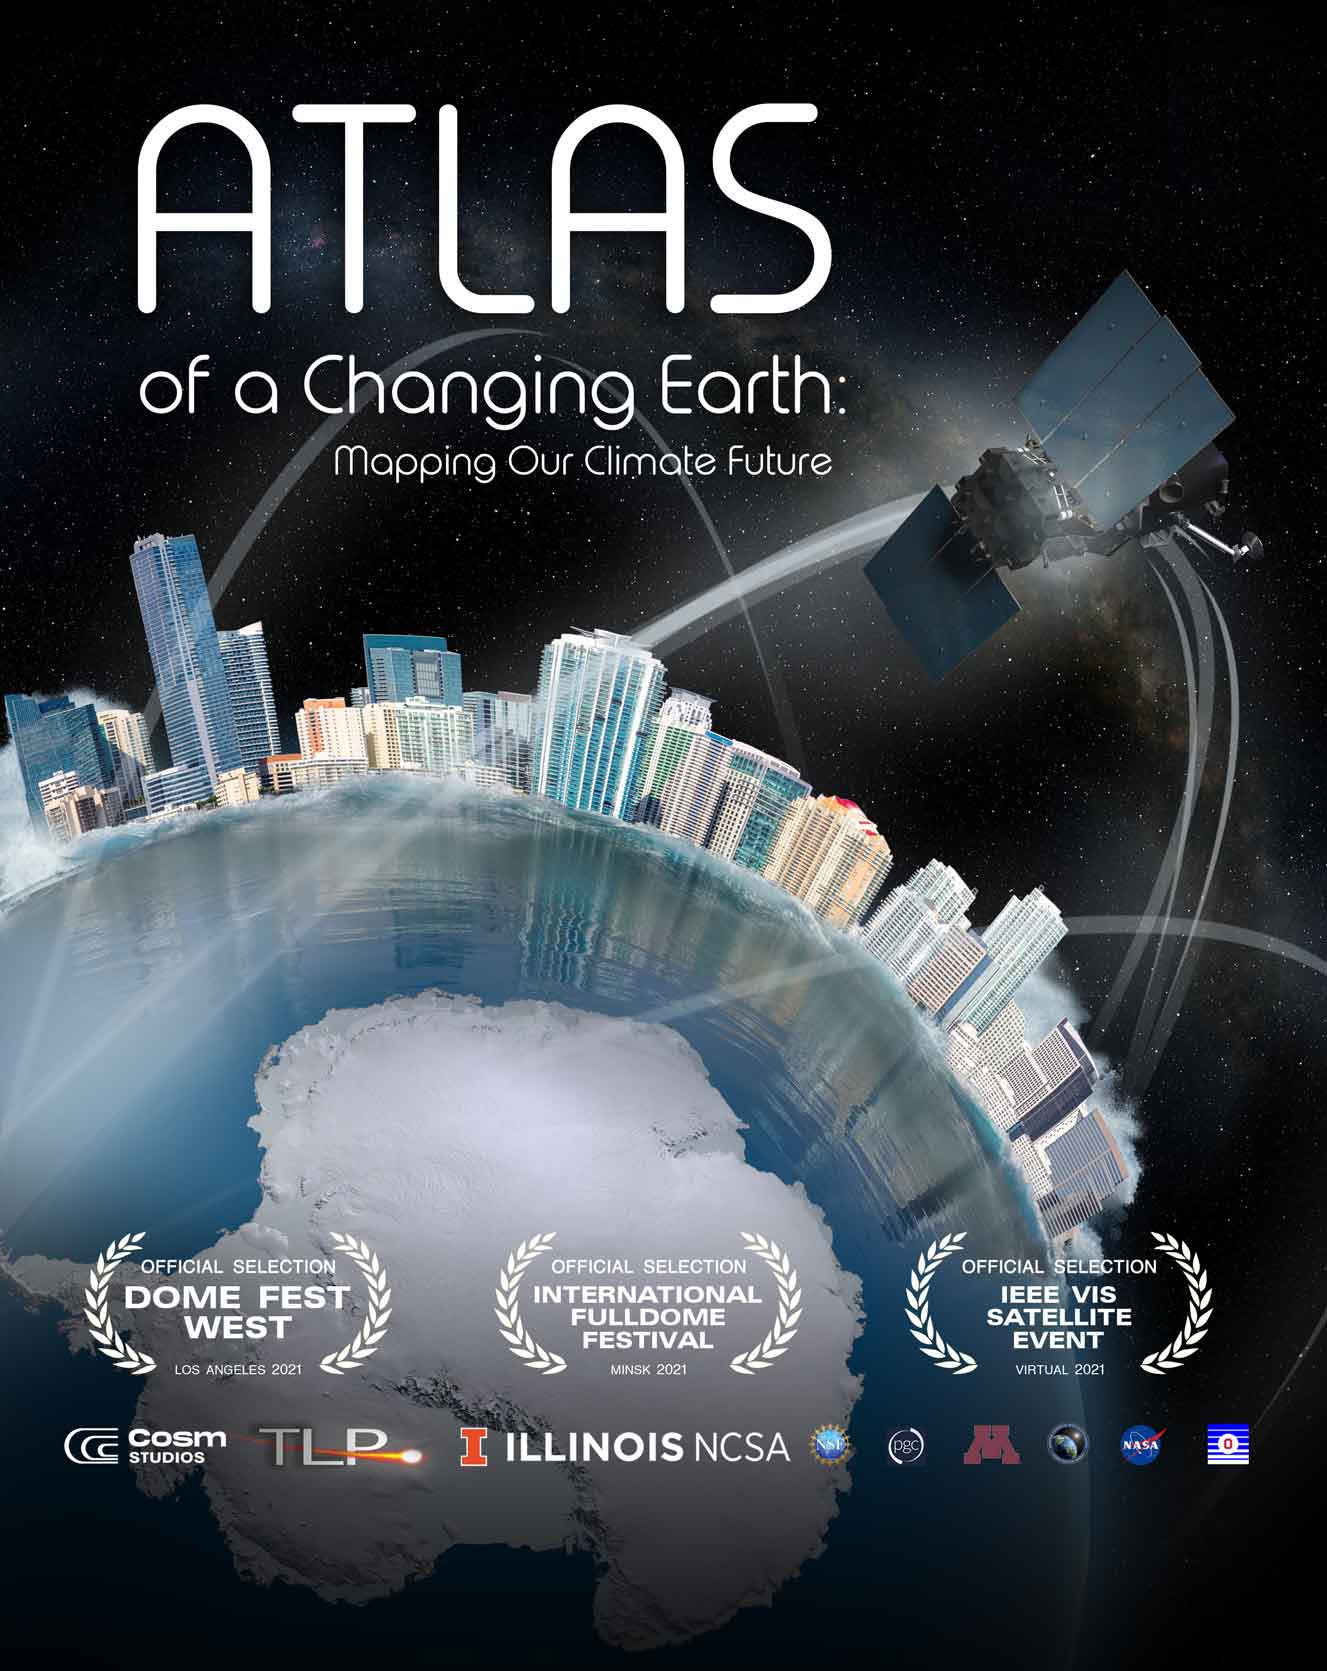 "Atlas of a Changing Earth" poster